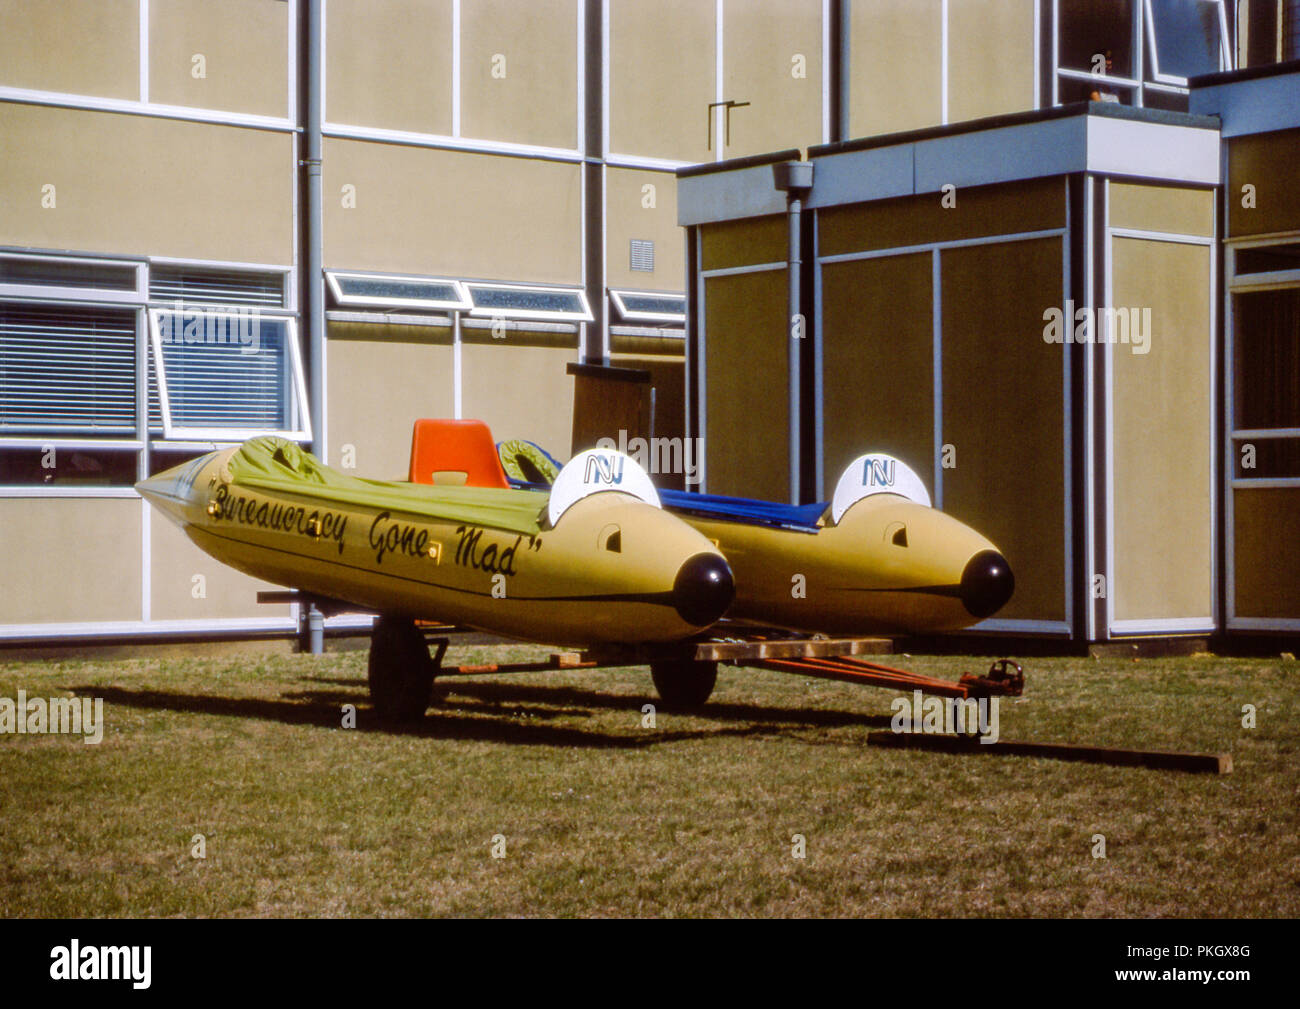 Homemade tandem canoes made for the Cromer Carnival in 1976 by staff at North Norfolk County Council. Original archive image taken in 1976. Stock Photo